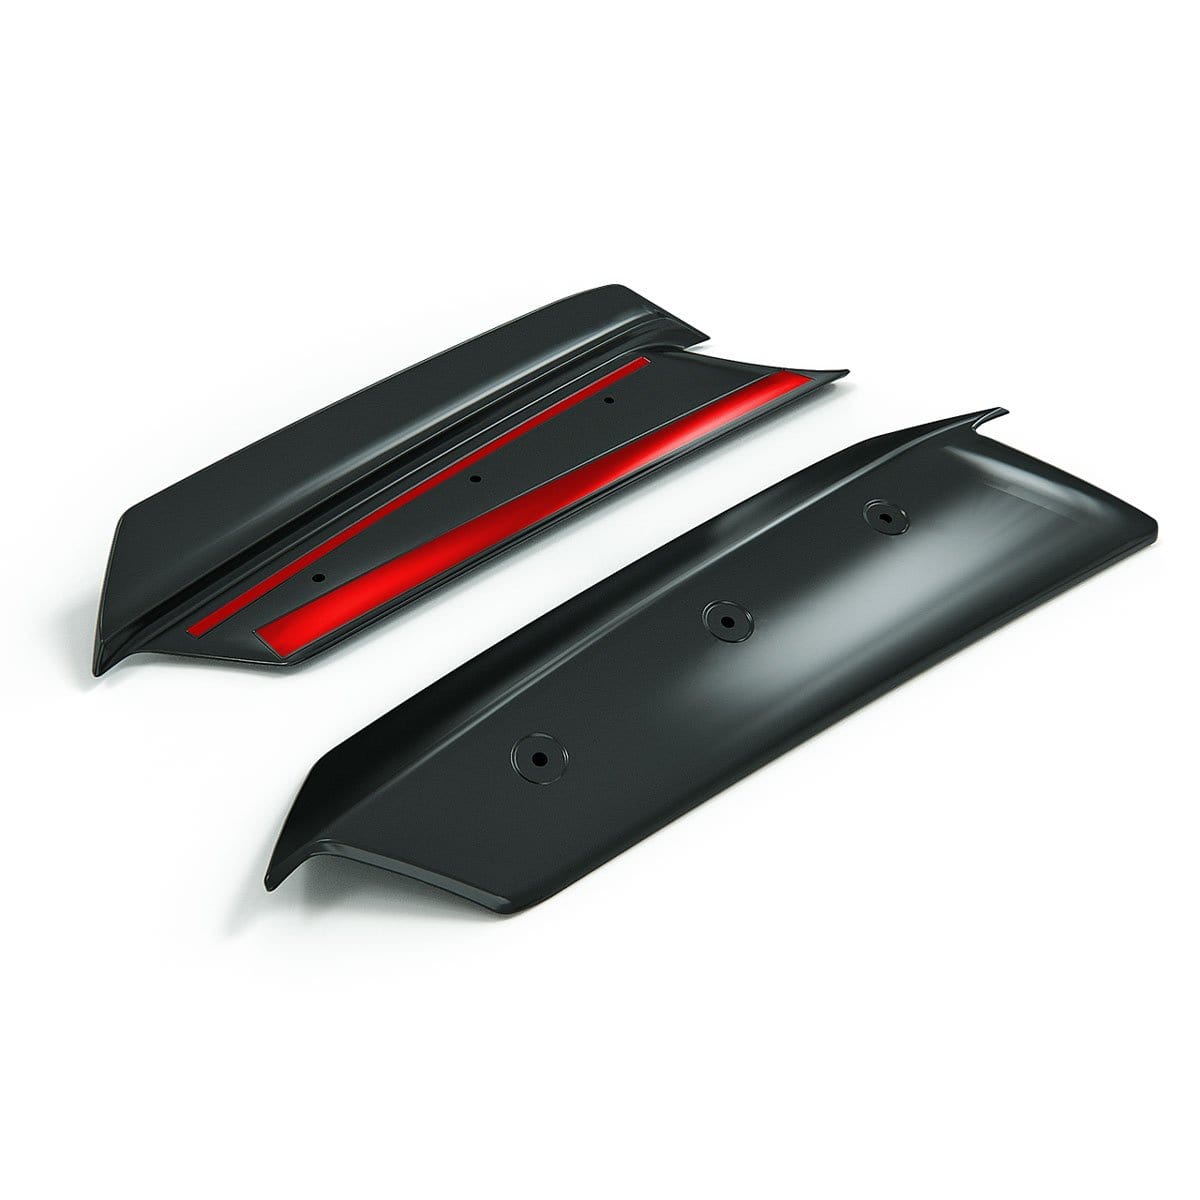 ACS Composite C8 Z51 Spoiler Wickers in Carbon Flash Black for Corvette C8 Stingray, SKU [50-4-063]CFZ. Enhance aerodynamics and style with easy installation.